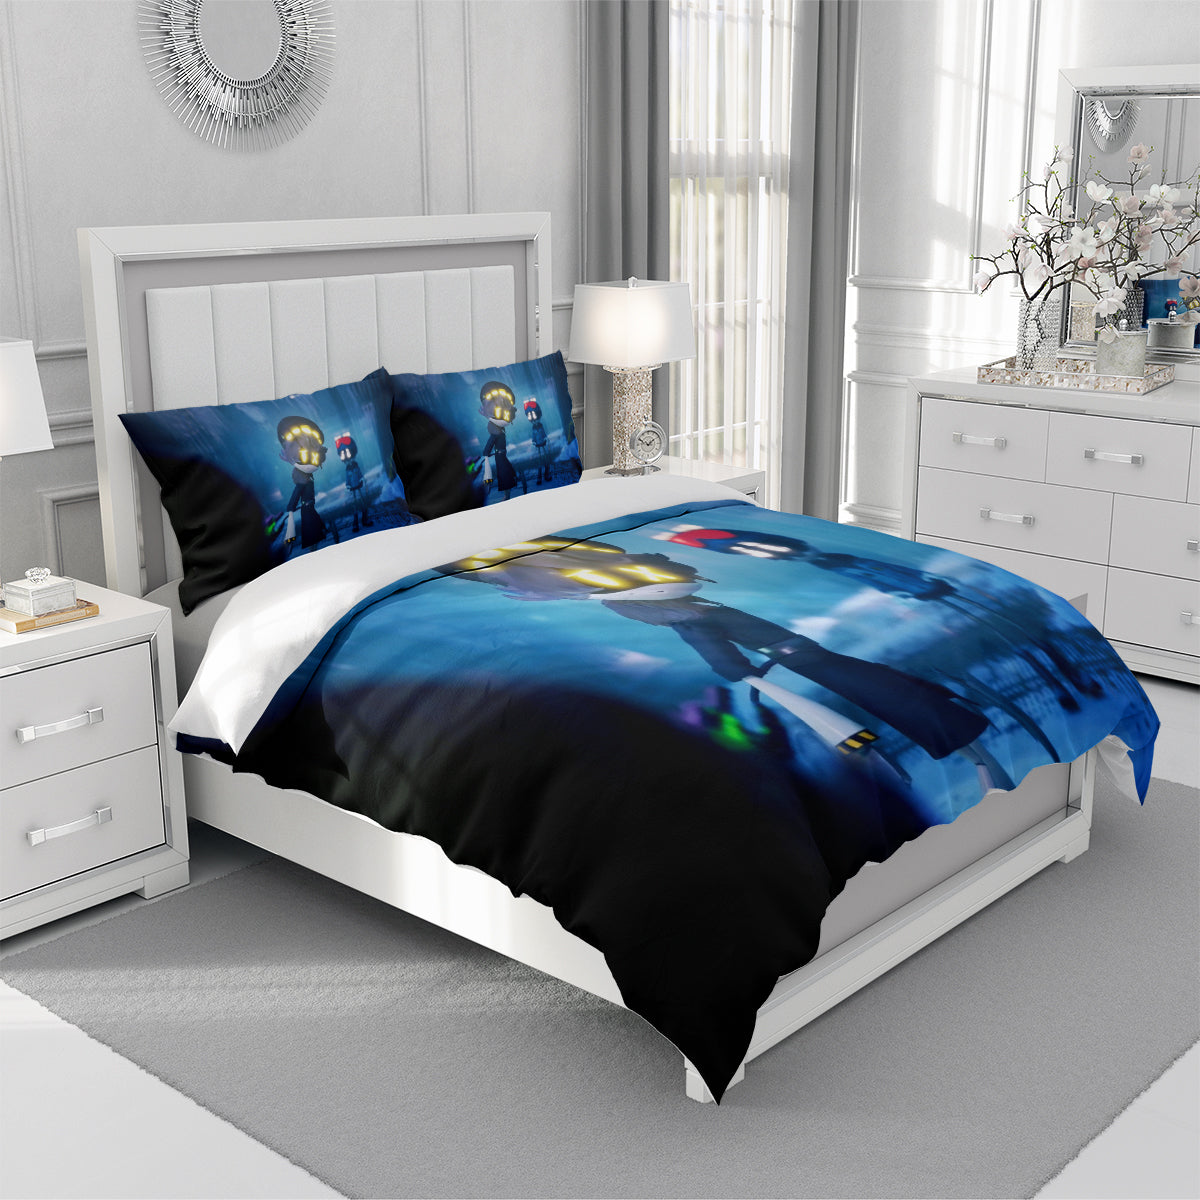 How to train your dragon 3D Bedding Sets